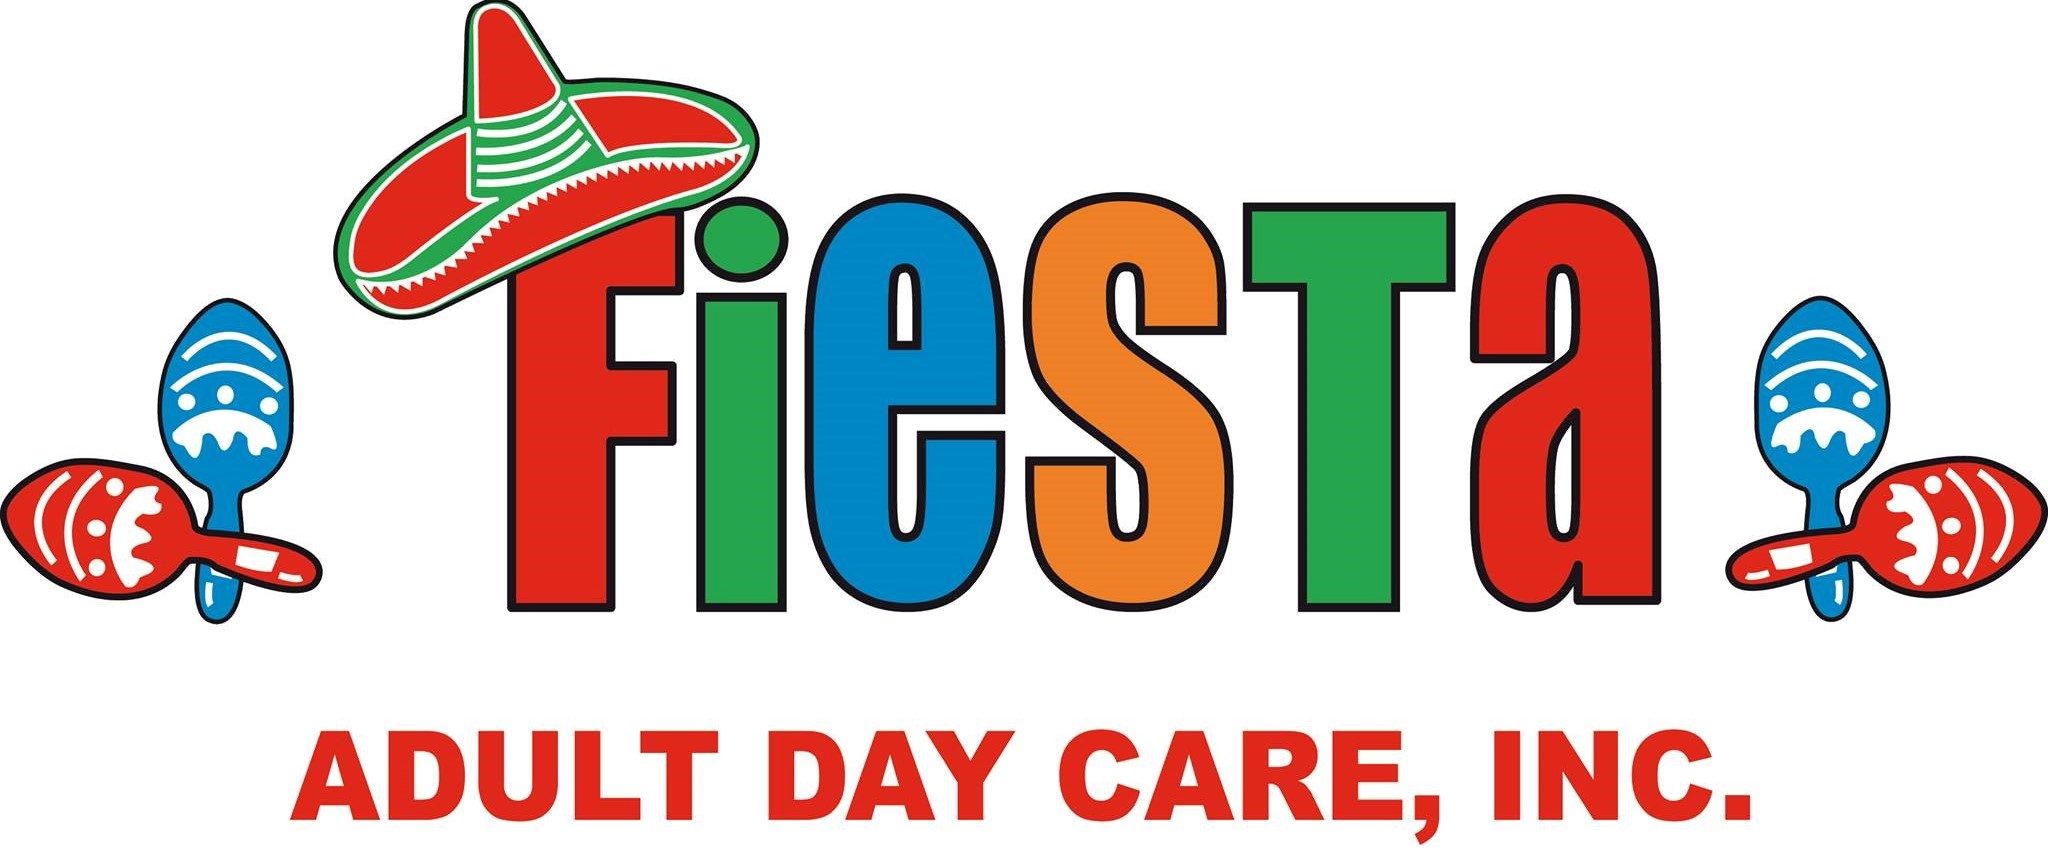 FIESTA ADULT DAY CARE, INC.